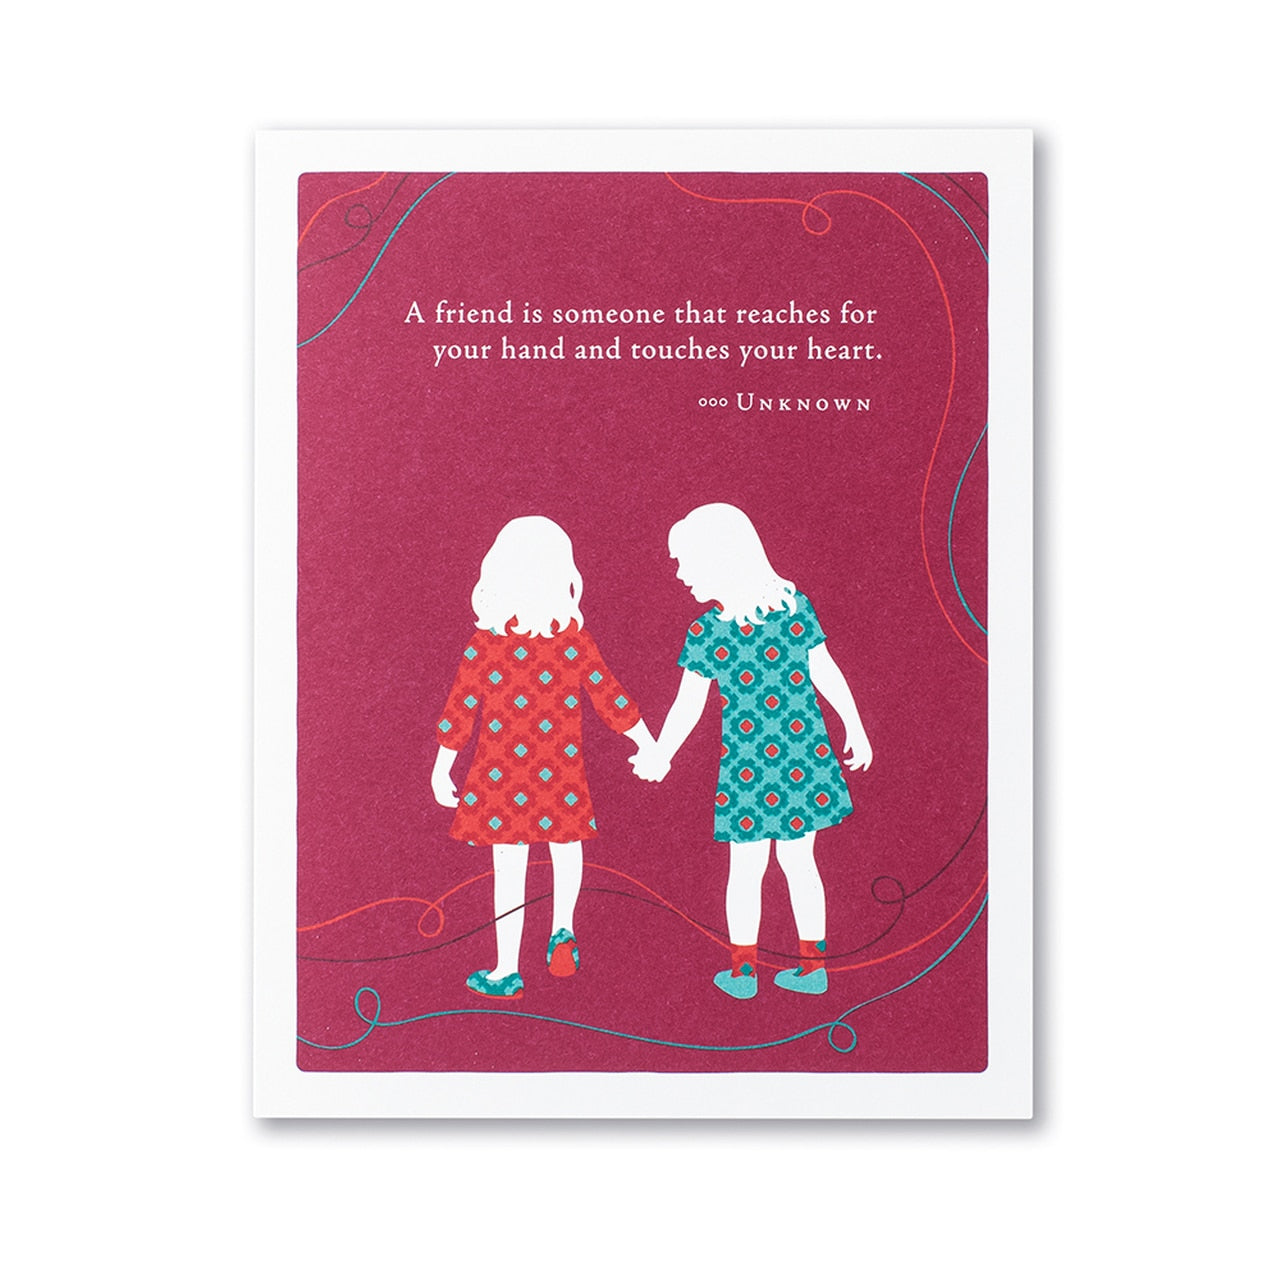 front is two young girls holding hands with text